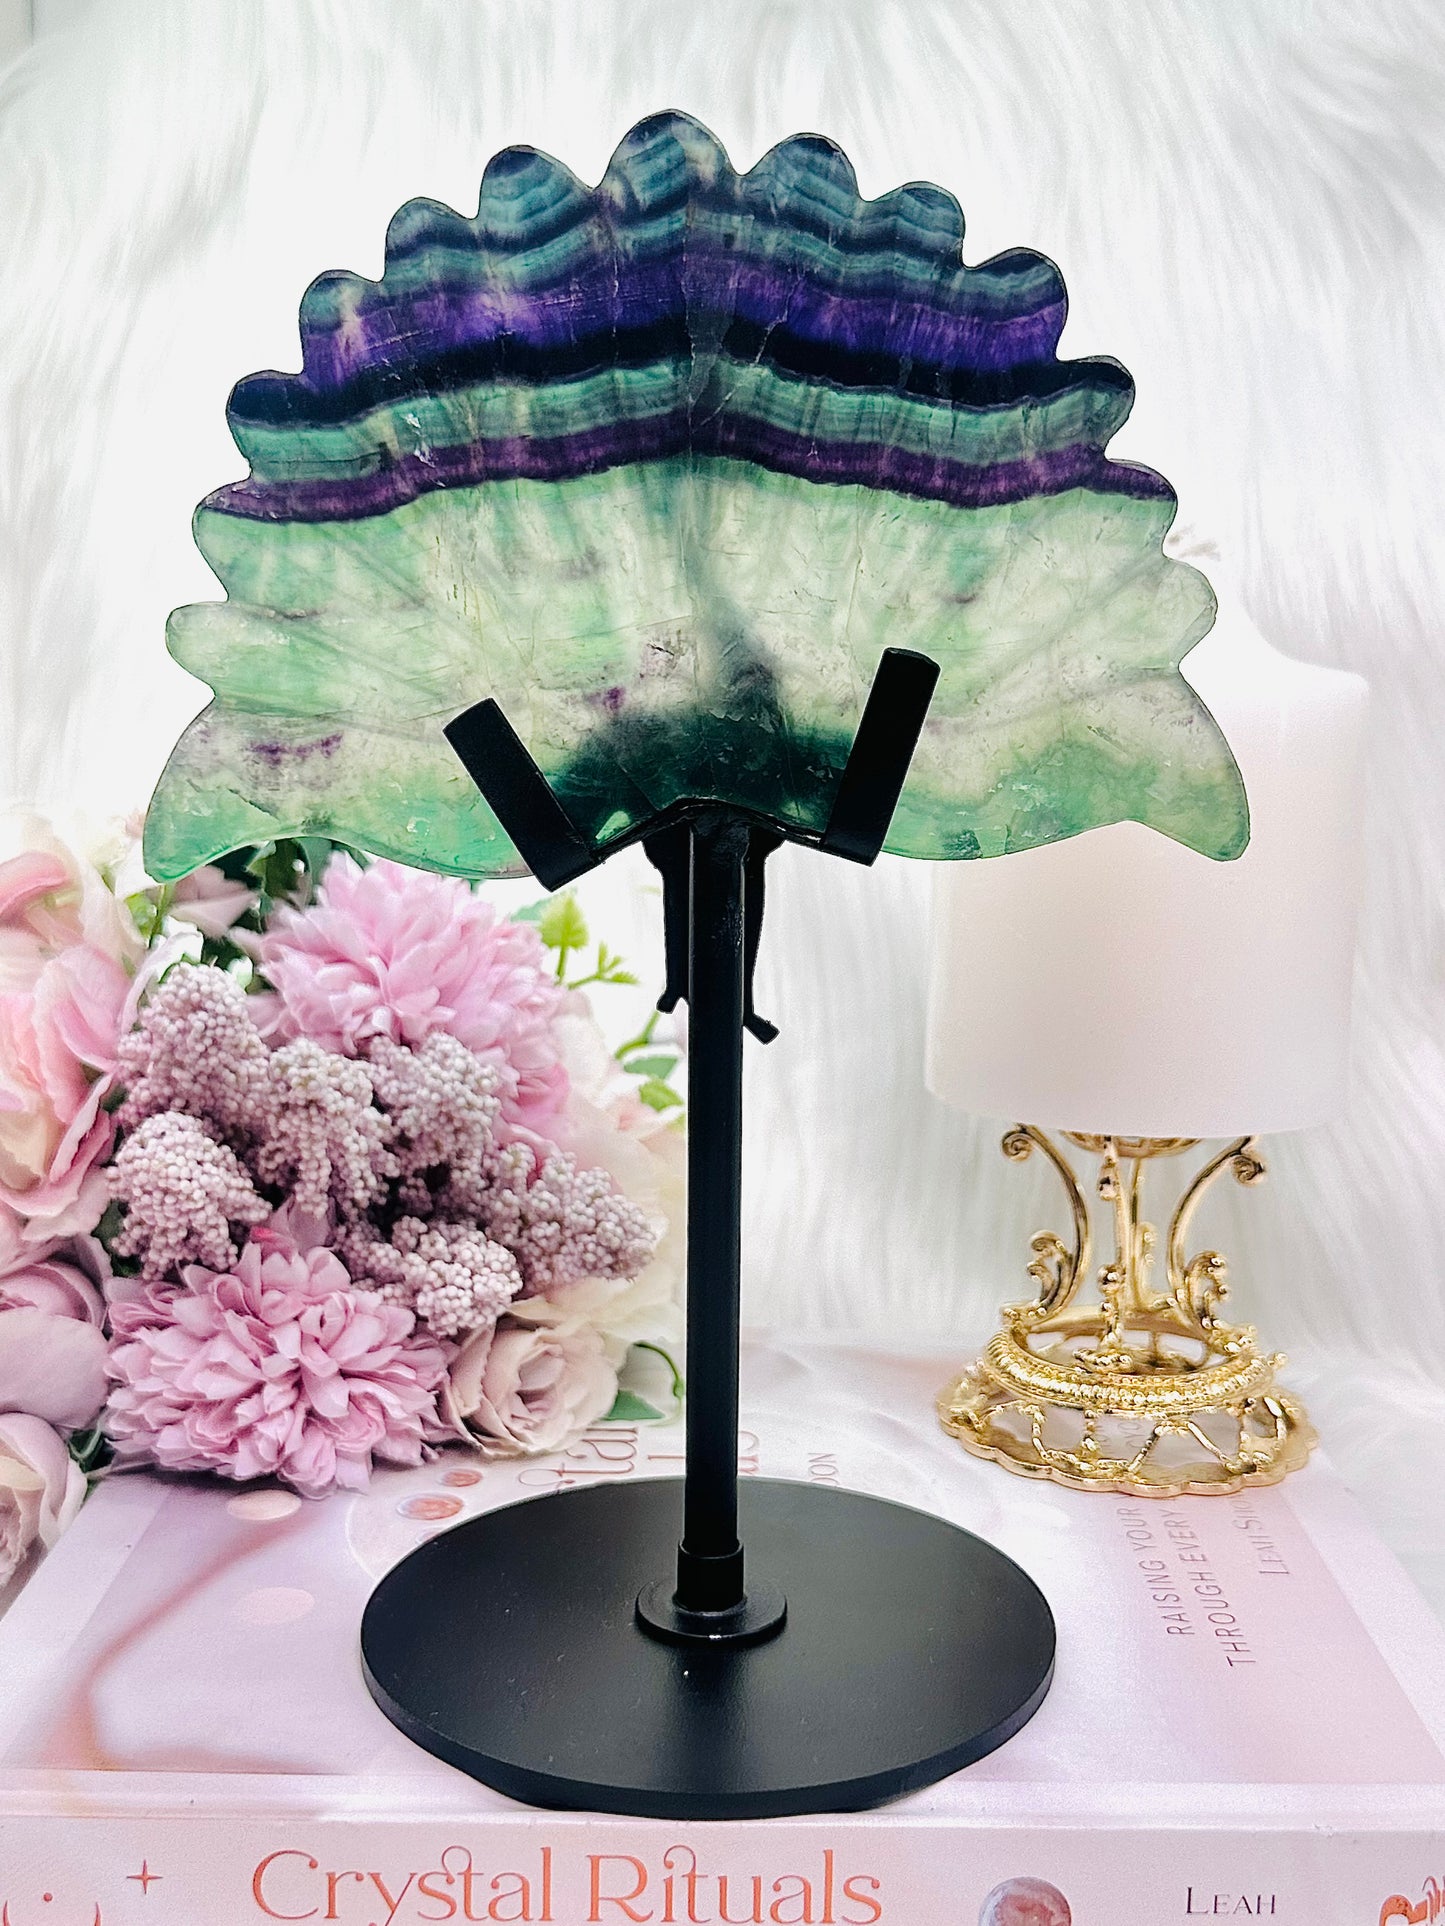 Wow!!! Incredibly Exquisite Large 22cm (inc stand) Fluorite Peacock ~ Such A Beautiful Piece